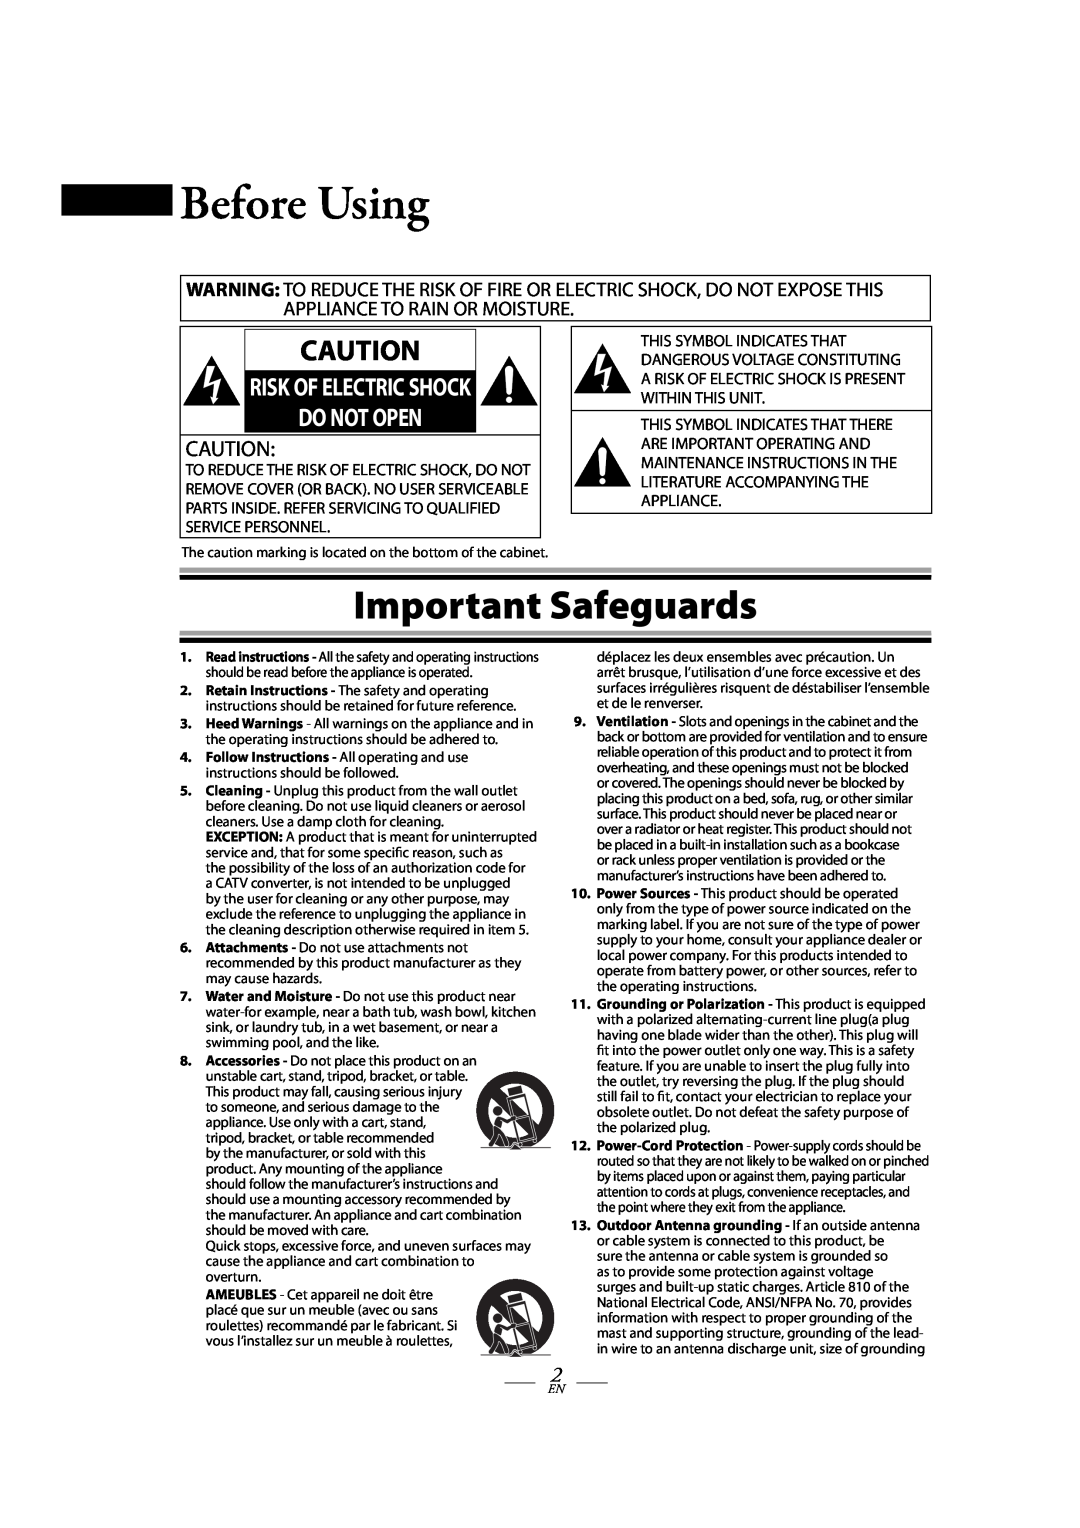 Magnavox TB110MW9 owner manual Before Using, Important Safeguards, Risk Of Electric Shock Do Not Open 